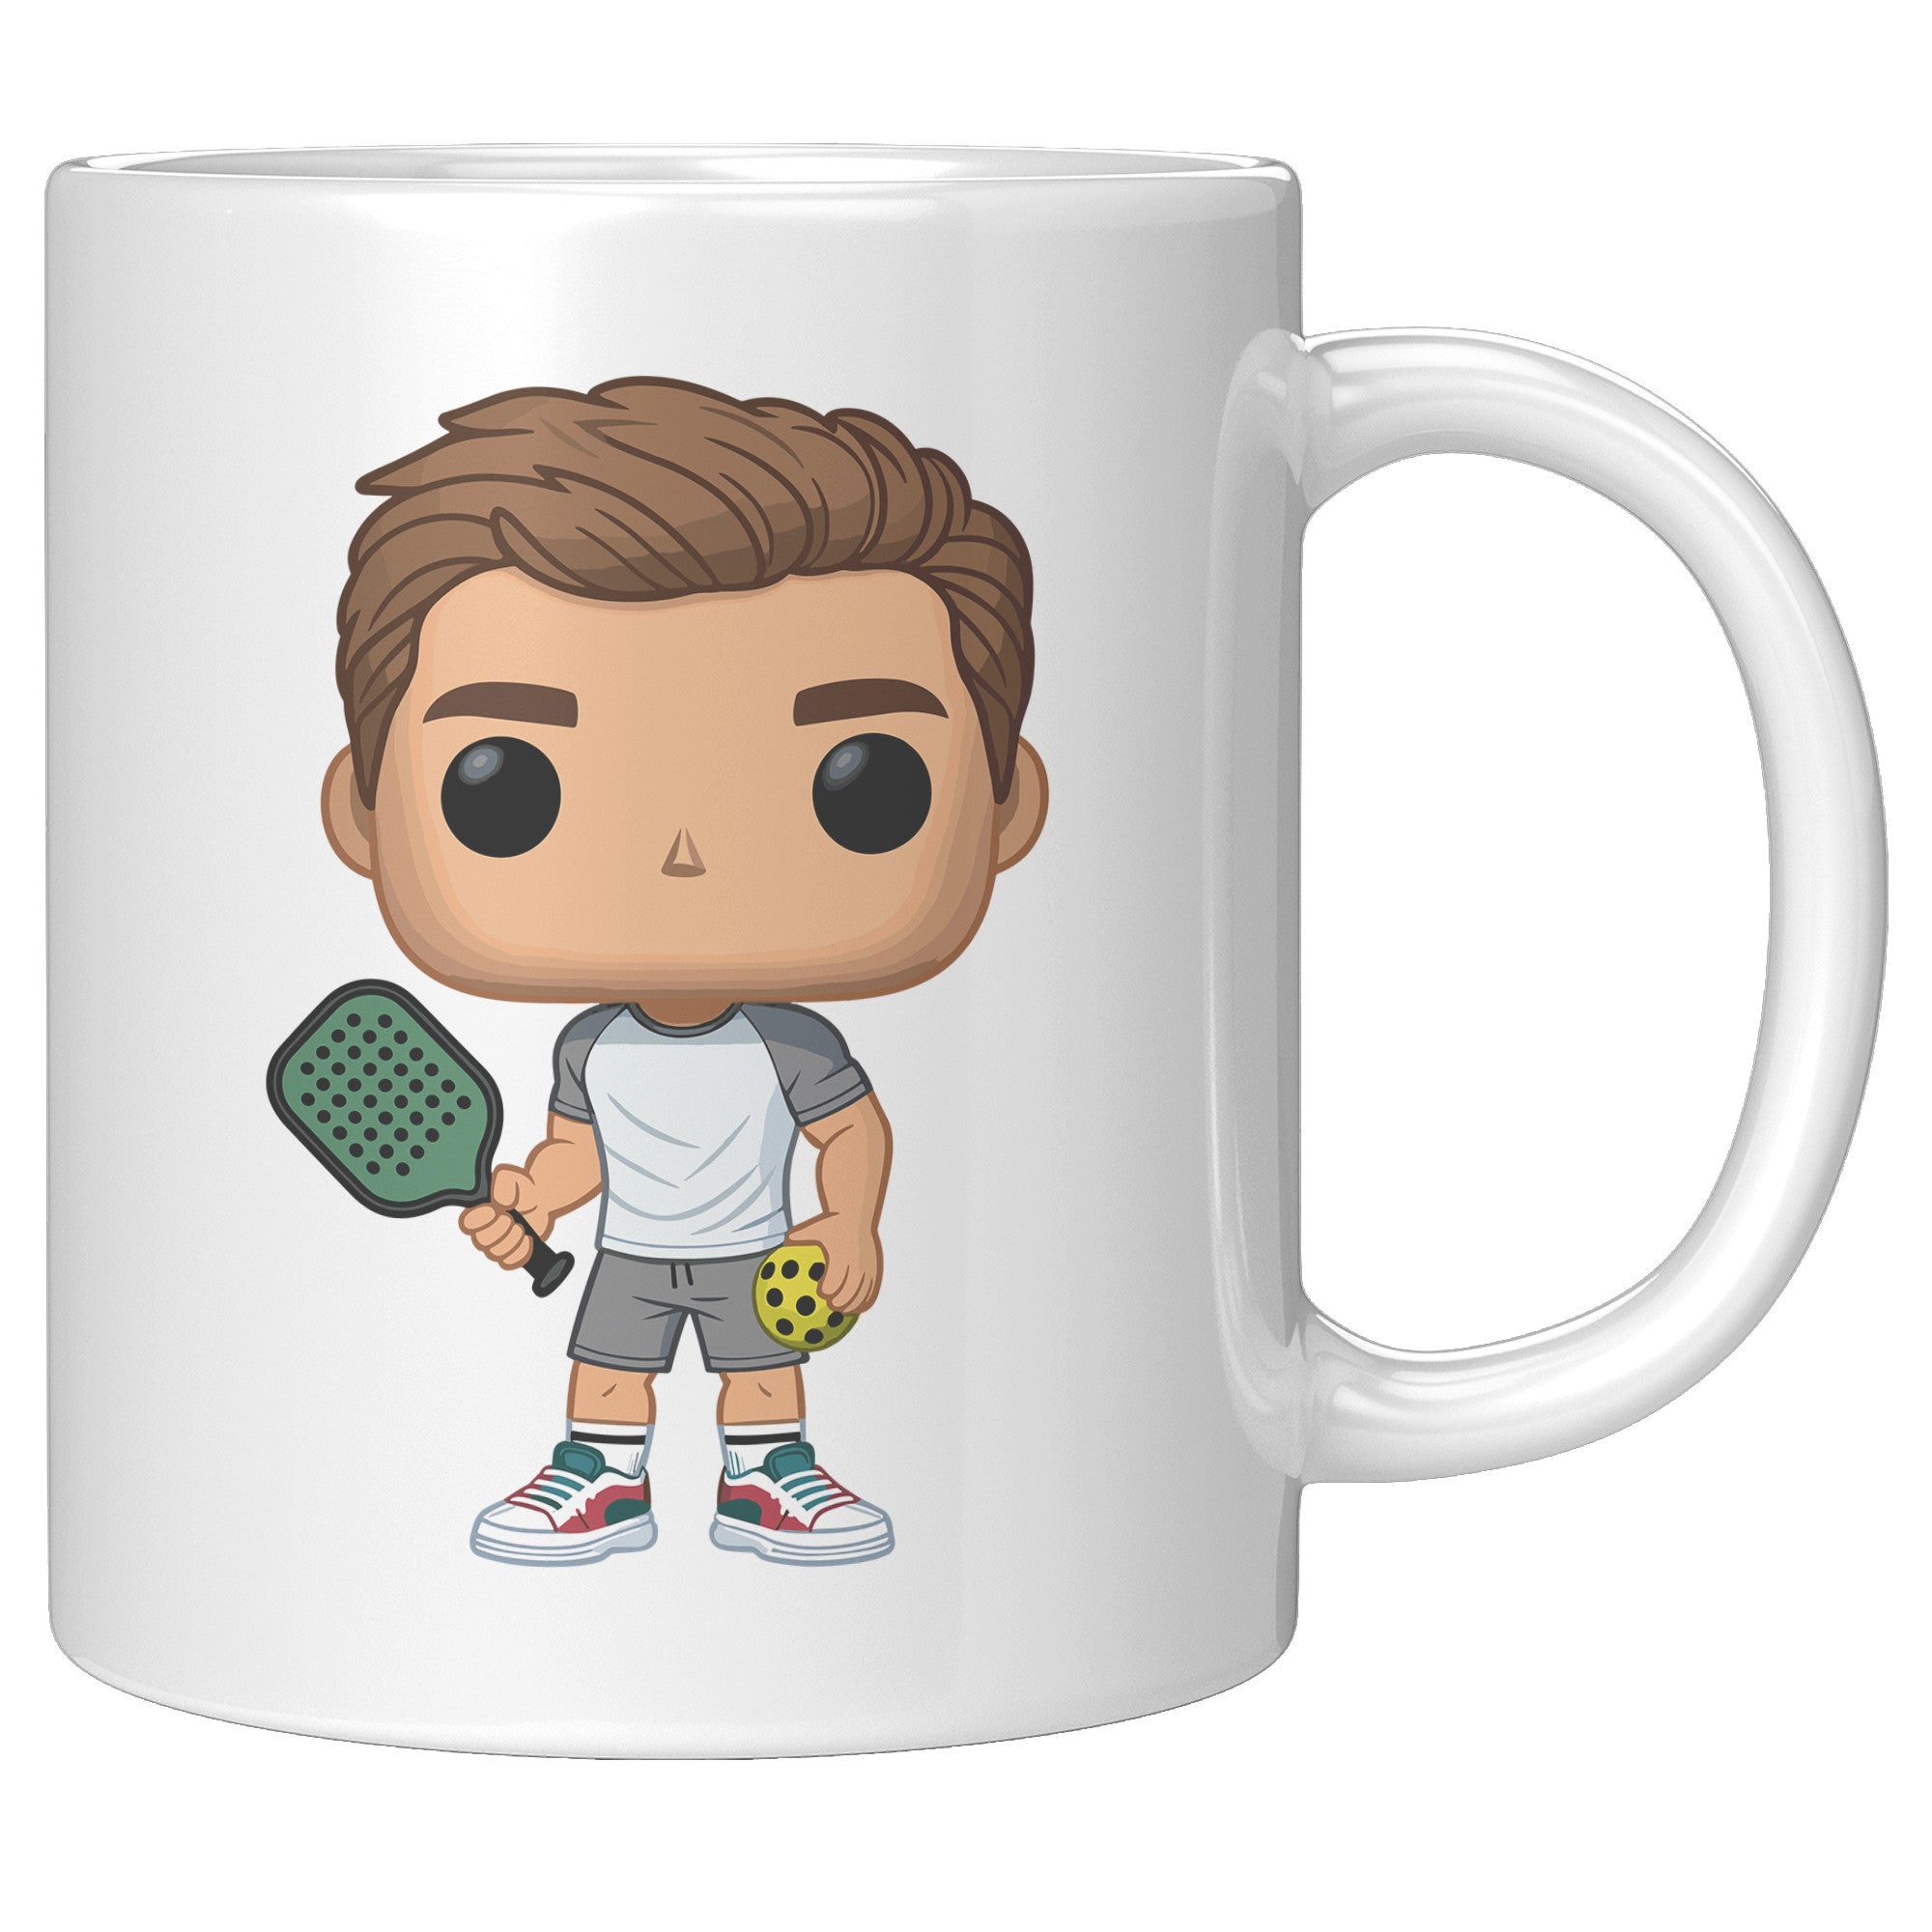 "Funko Pop Style Pickle Ball Player Boy Coffee Mug - Cute Athletic Cup - Perfect Gift for Pickle Ball Enthusiasts - Sporty Boy Apparel" - C